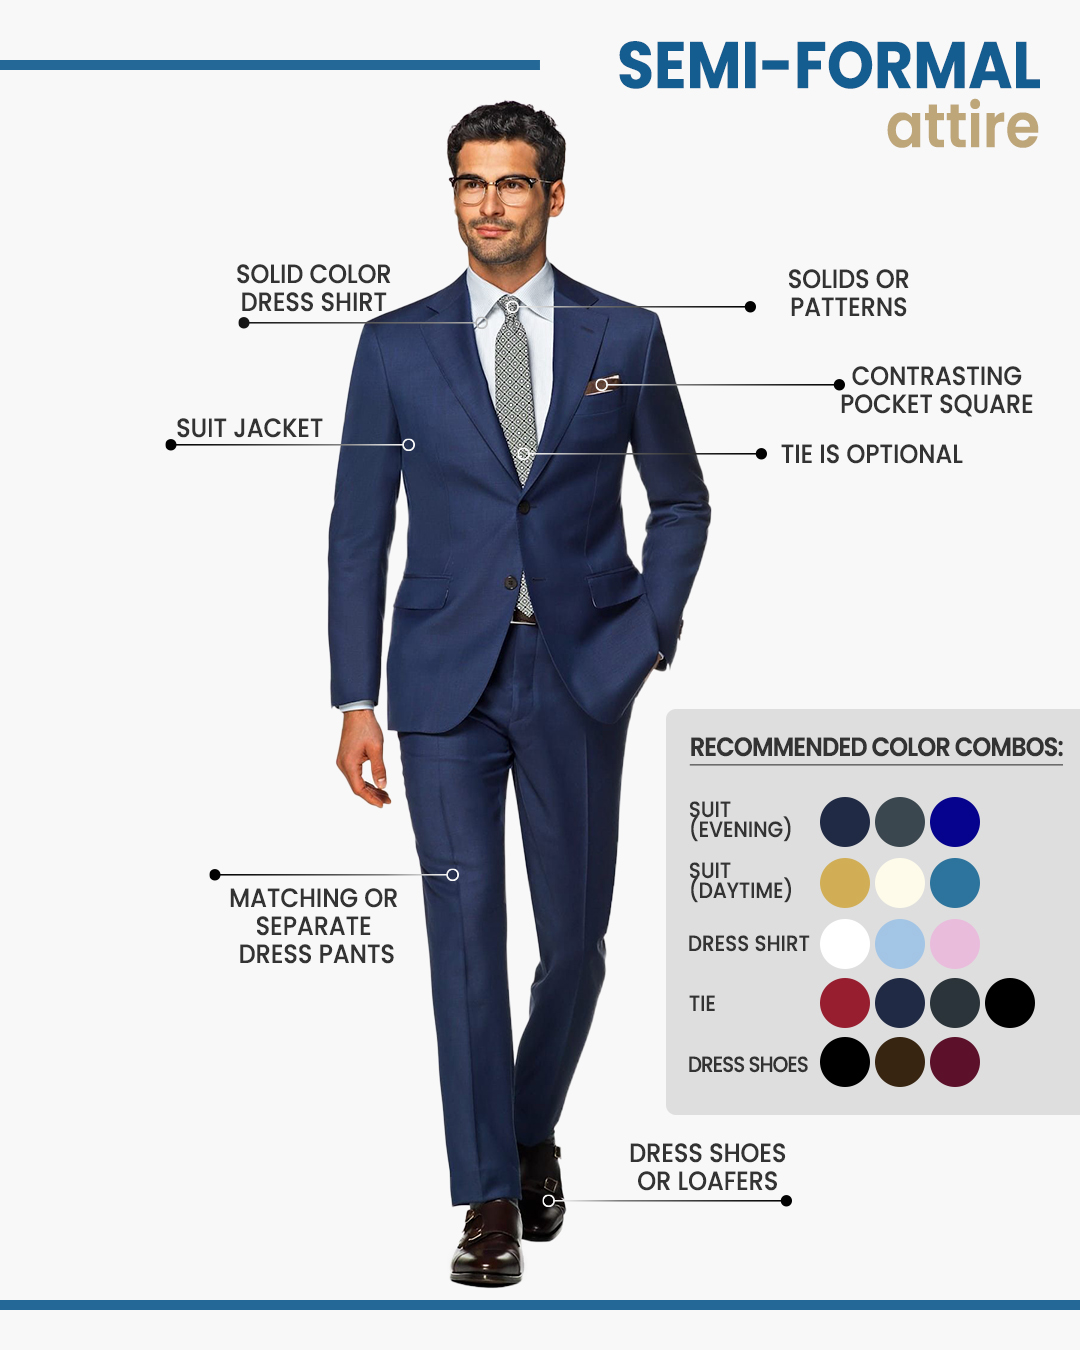 What are some good color combinations for men's formal wear? - Quora